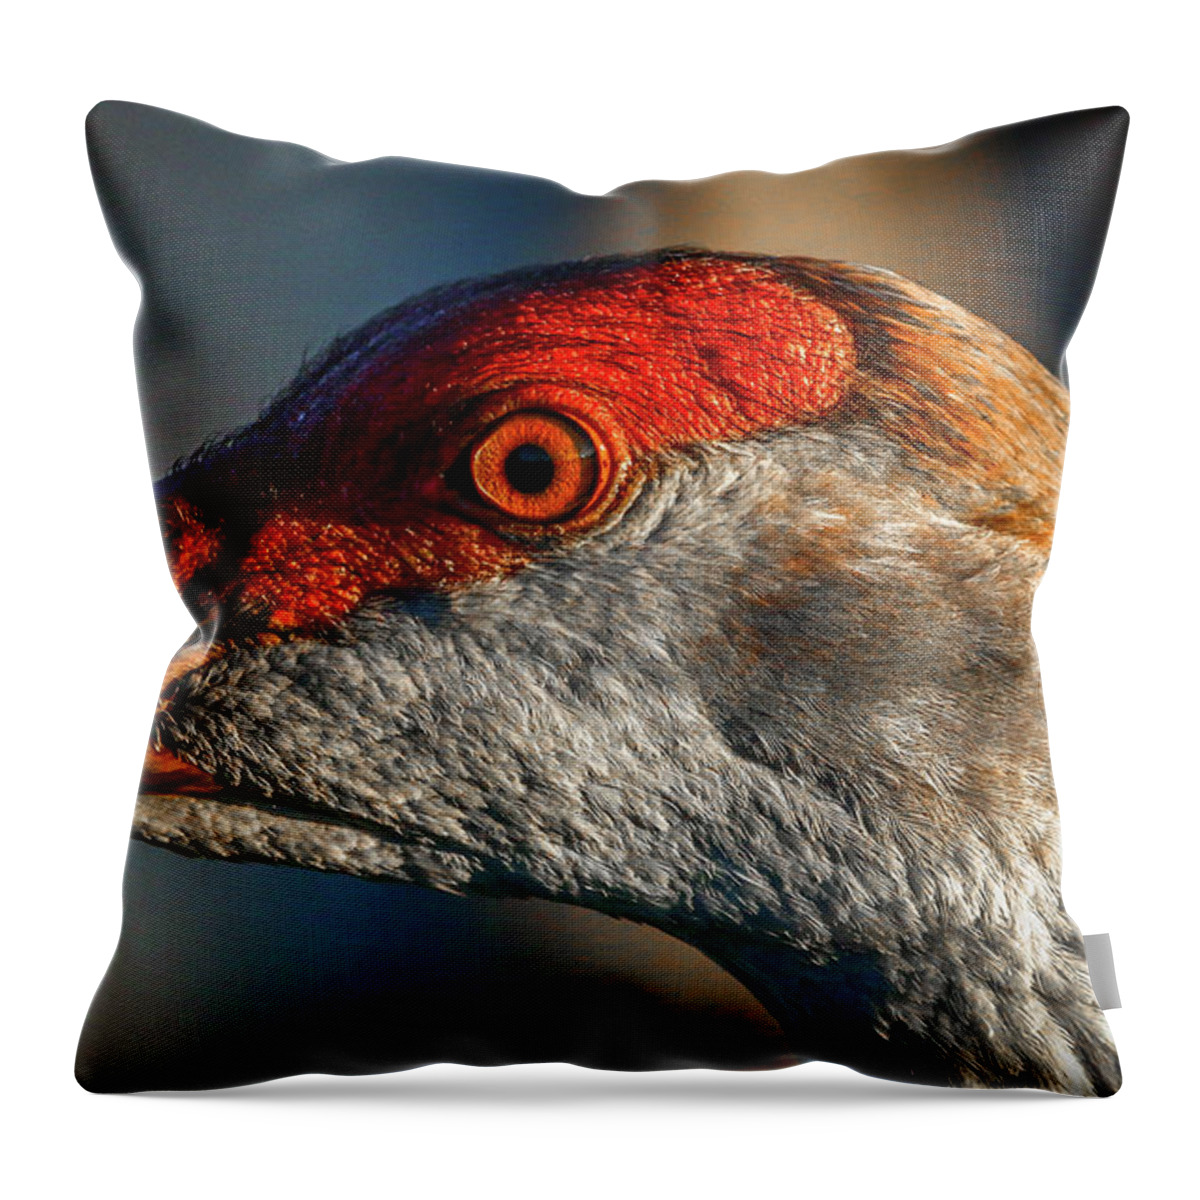 Sandhill Throw Pillow featuring the photograph Sandhill Close Up Portrait by Tom Claud